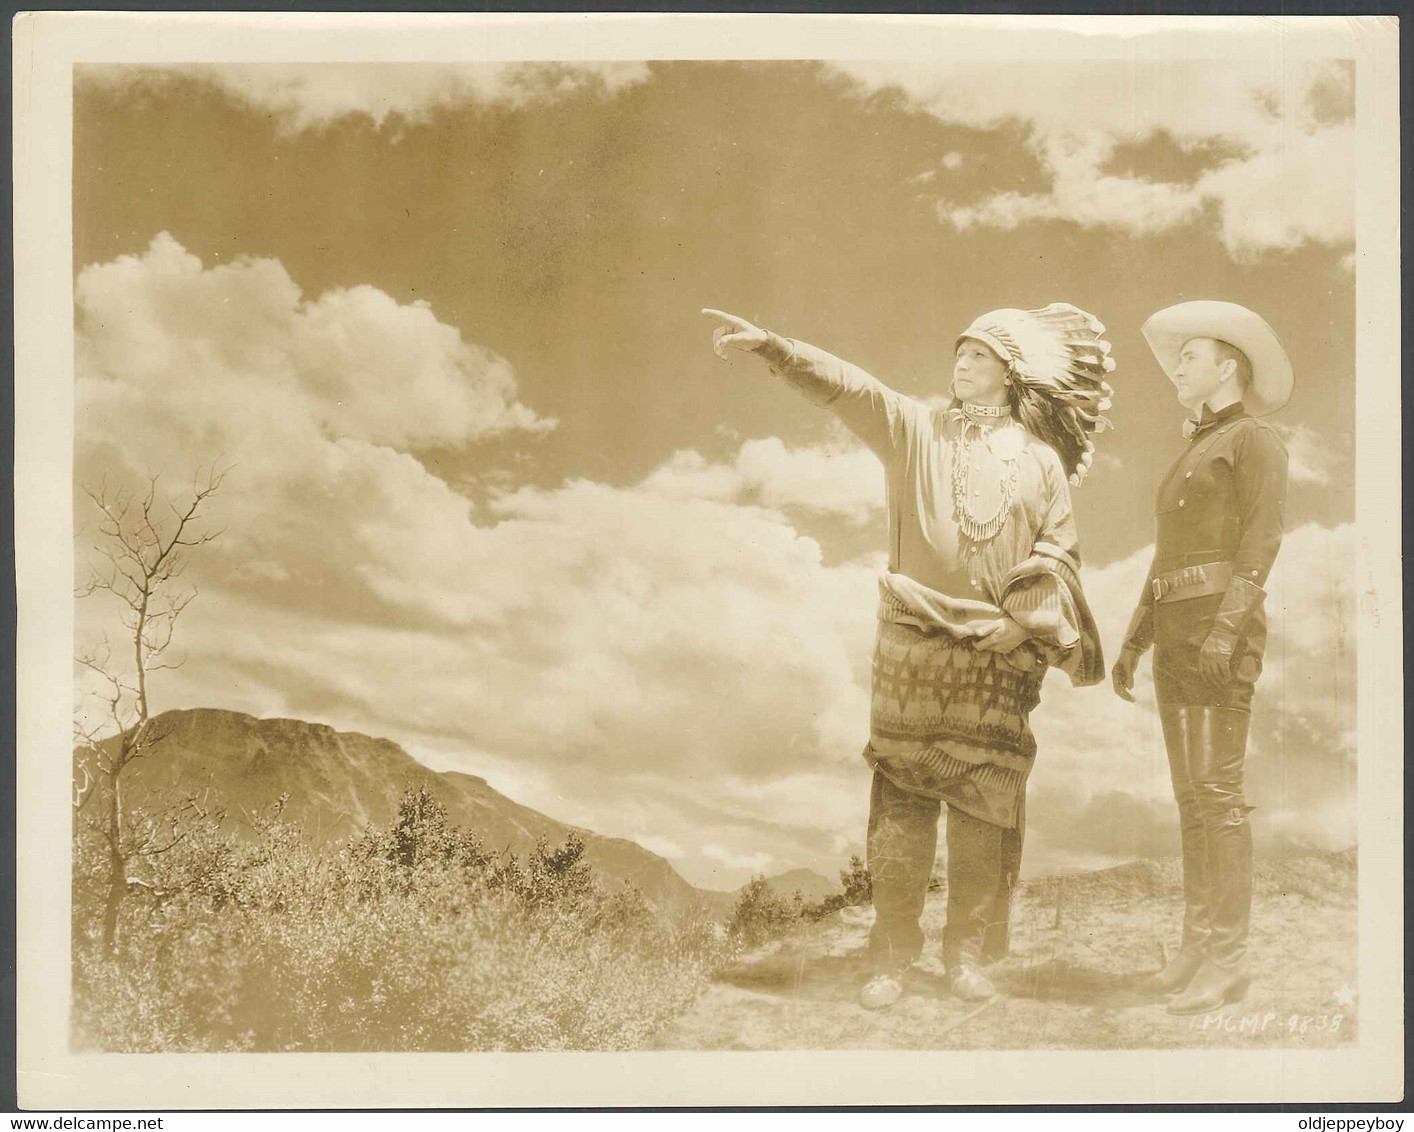 Leader  Chief BIG TREE Shows TIM MCCOY Shows The  SIOUX REGION WHERE NEXT FILM WILL BE RECORDED RARE  21X 27 Cm - - Photographs